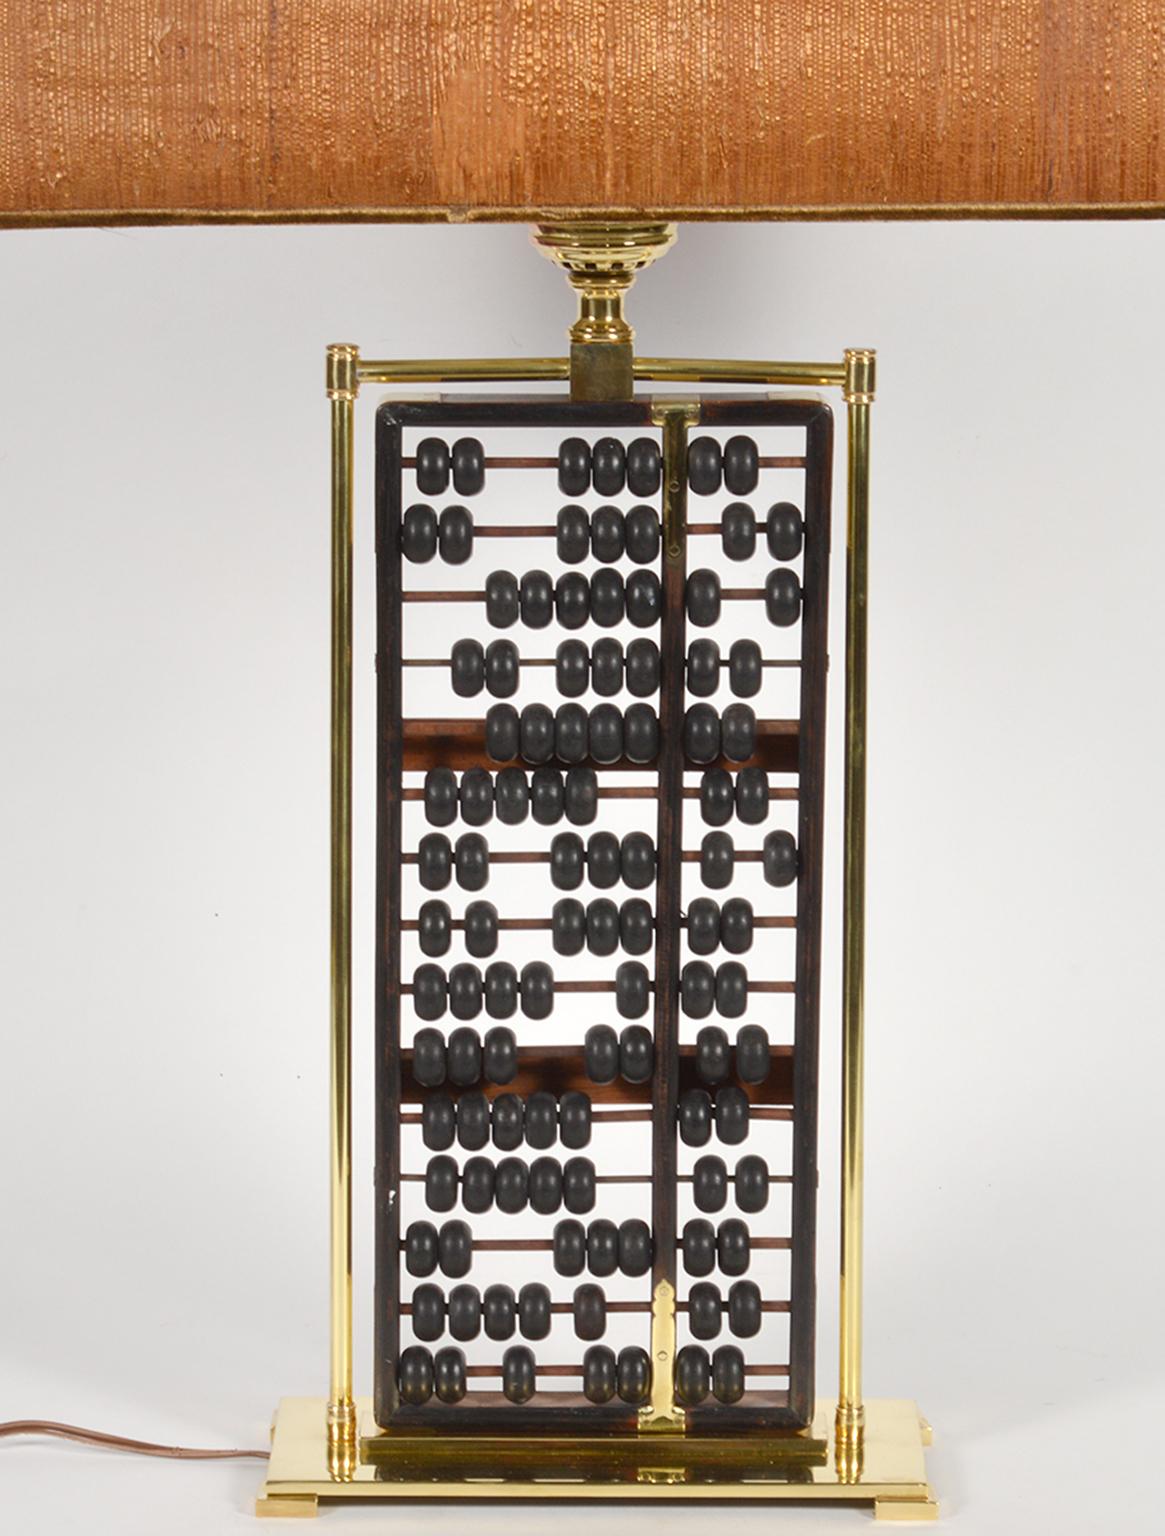 Standing 31.5 inches high including the original bark covered shade this lamp consists of an antique Chinese abacus incorporated in solid brass framing and resting on a rectangular footed brass base. The lamp retains its original conical milk glass